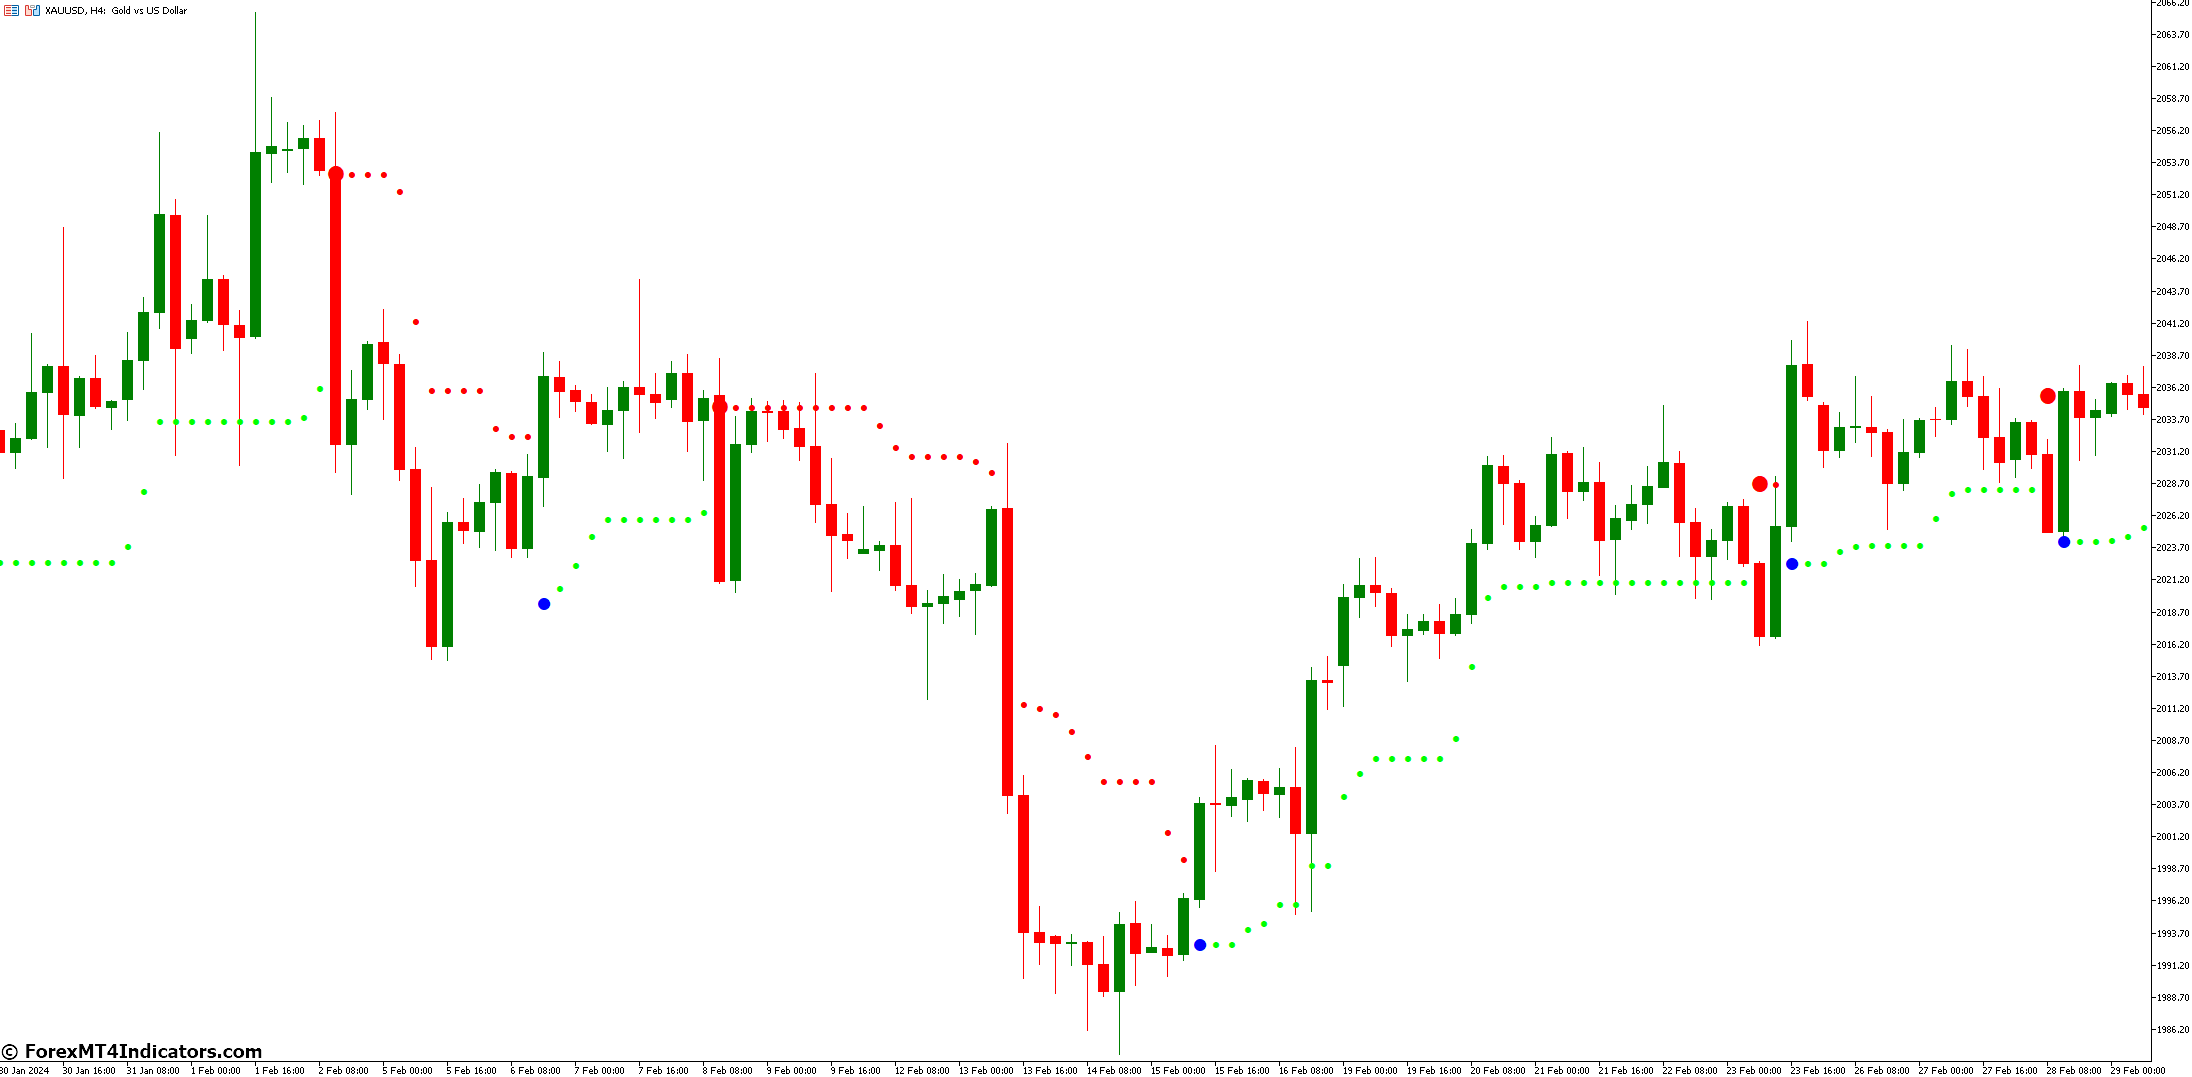 What are Trading Strategies While Using This Indicator